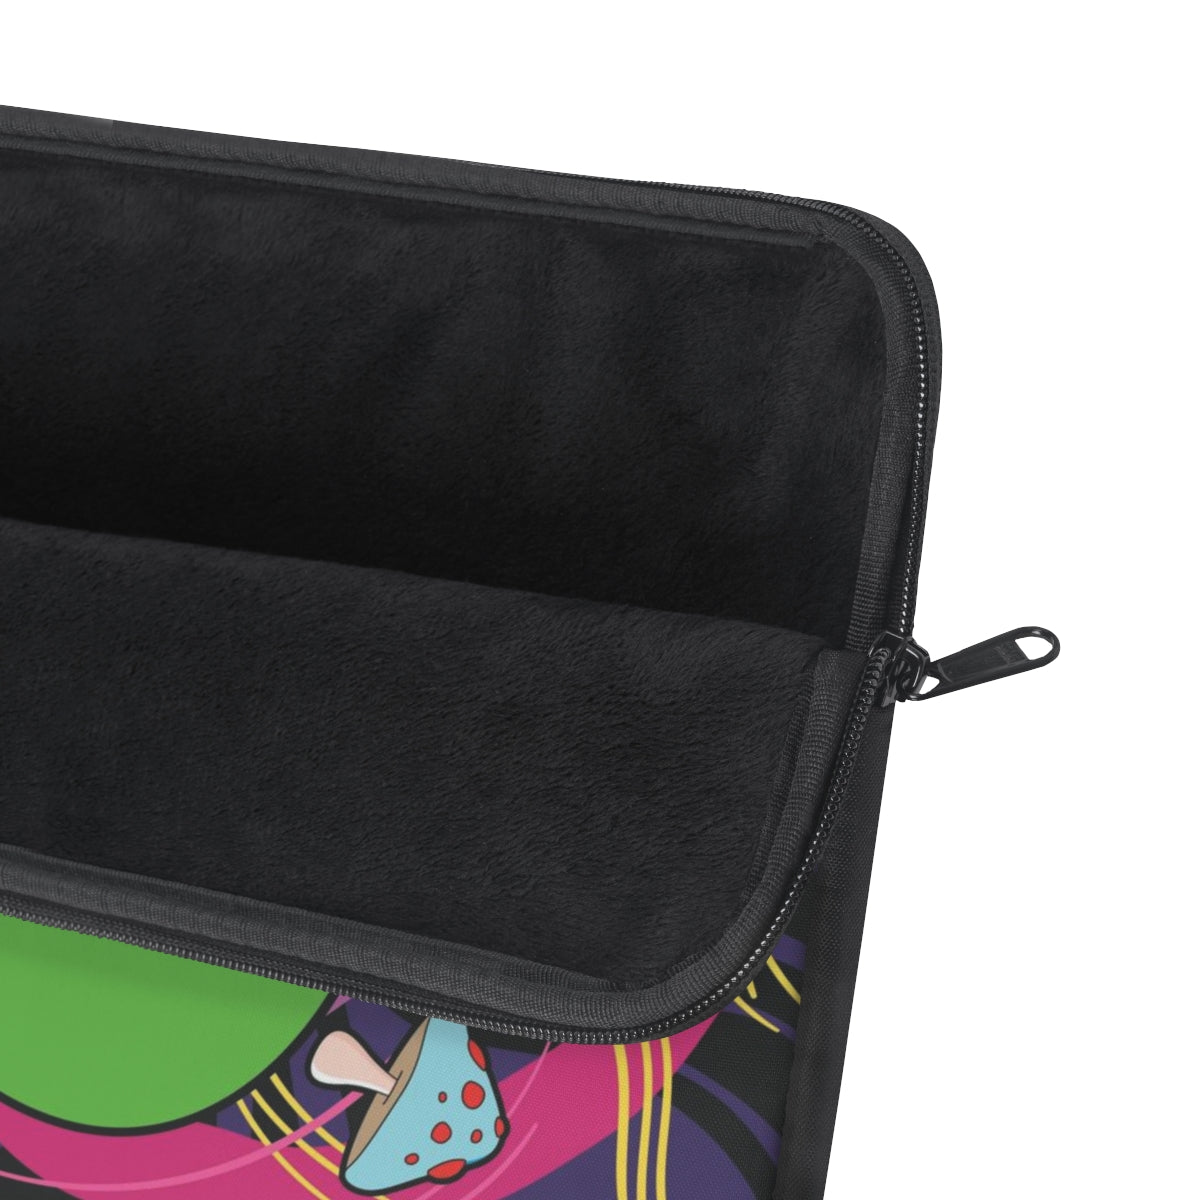 Psychedelic Alien in Outer Space - Laptop Sleeve - Dresstorave